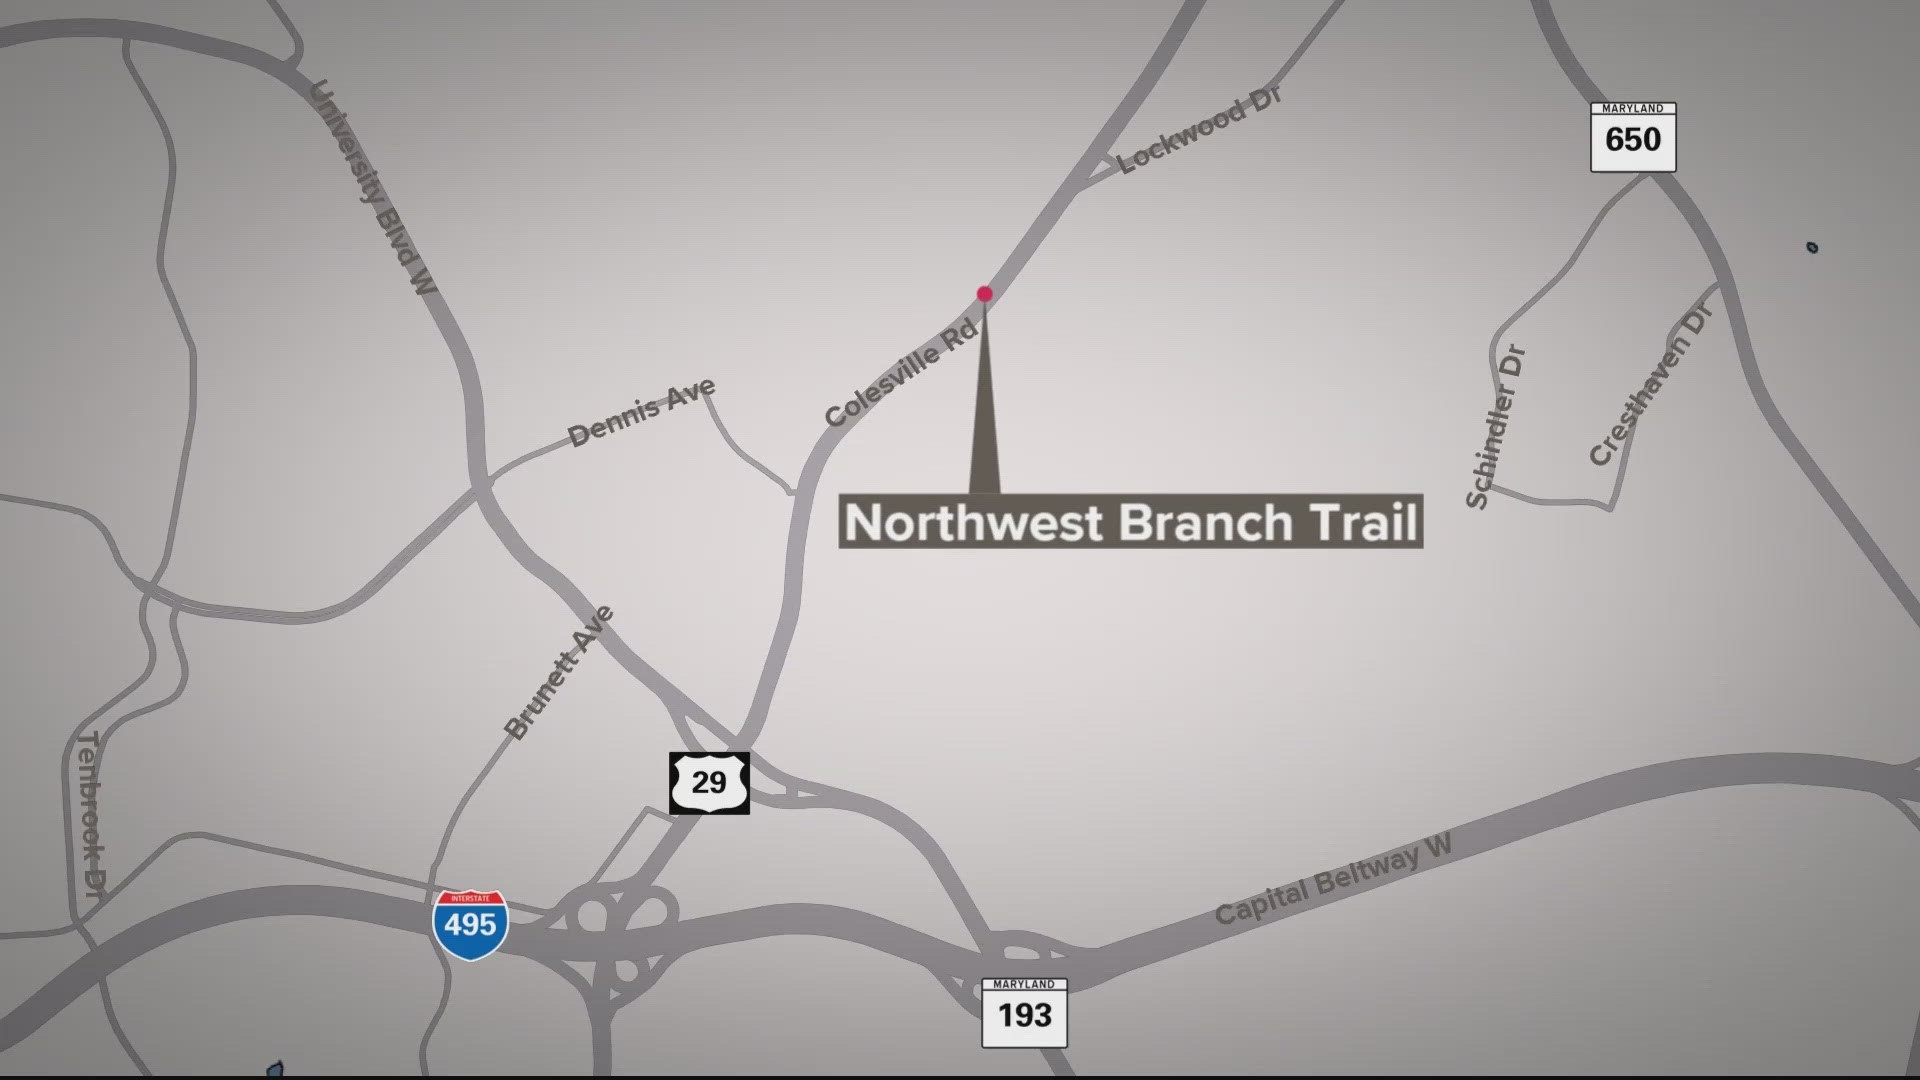 The victim told police a man approached her on the Northwest Branch Trail and took out a weapon before sexually assaulting and robbing her.